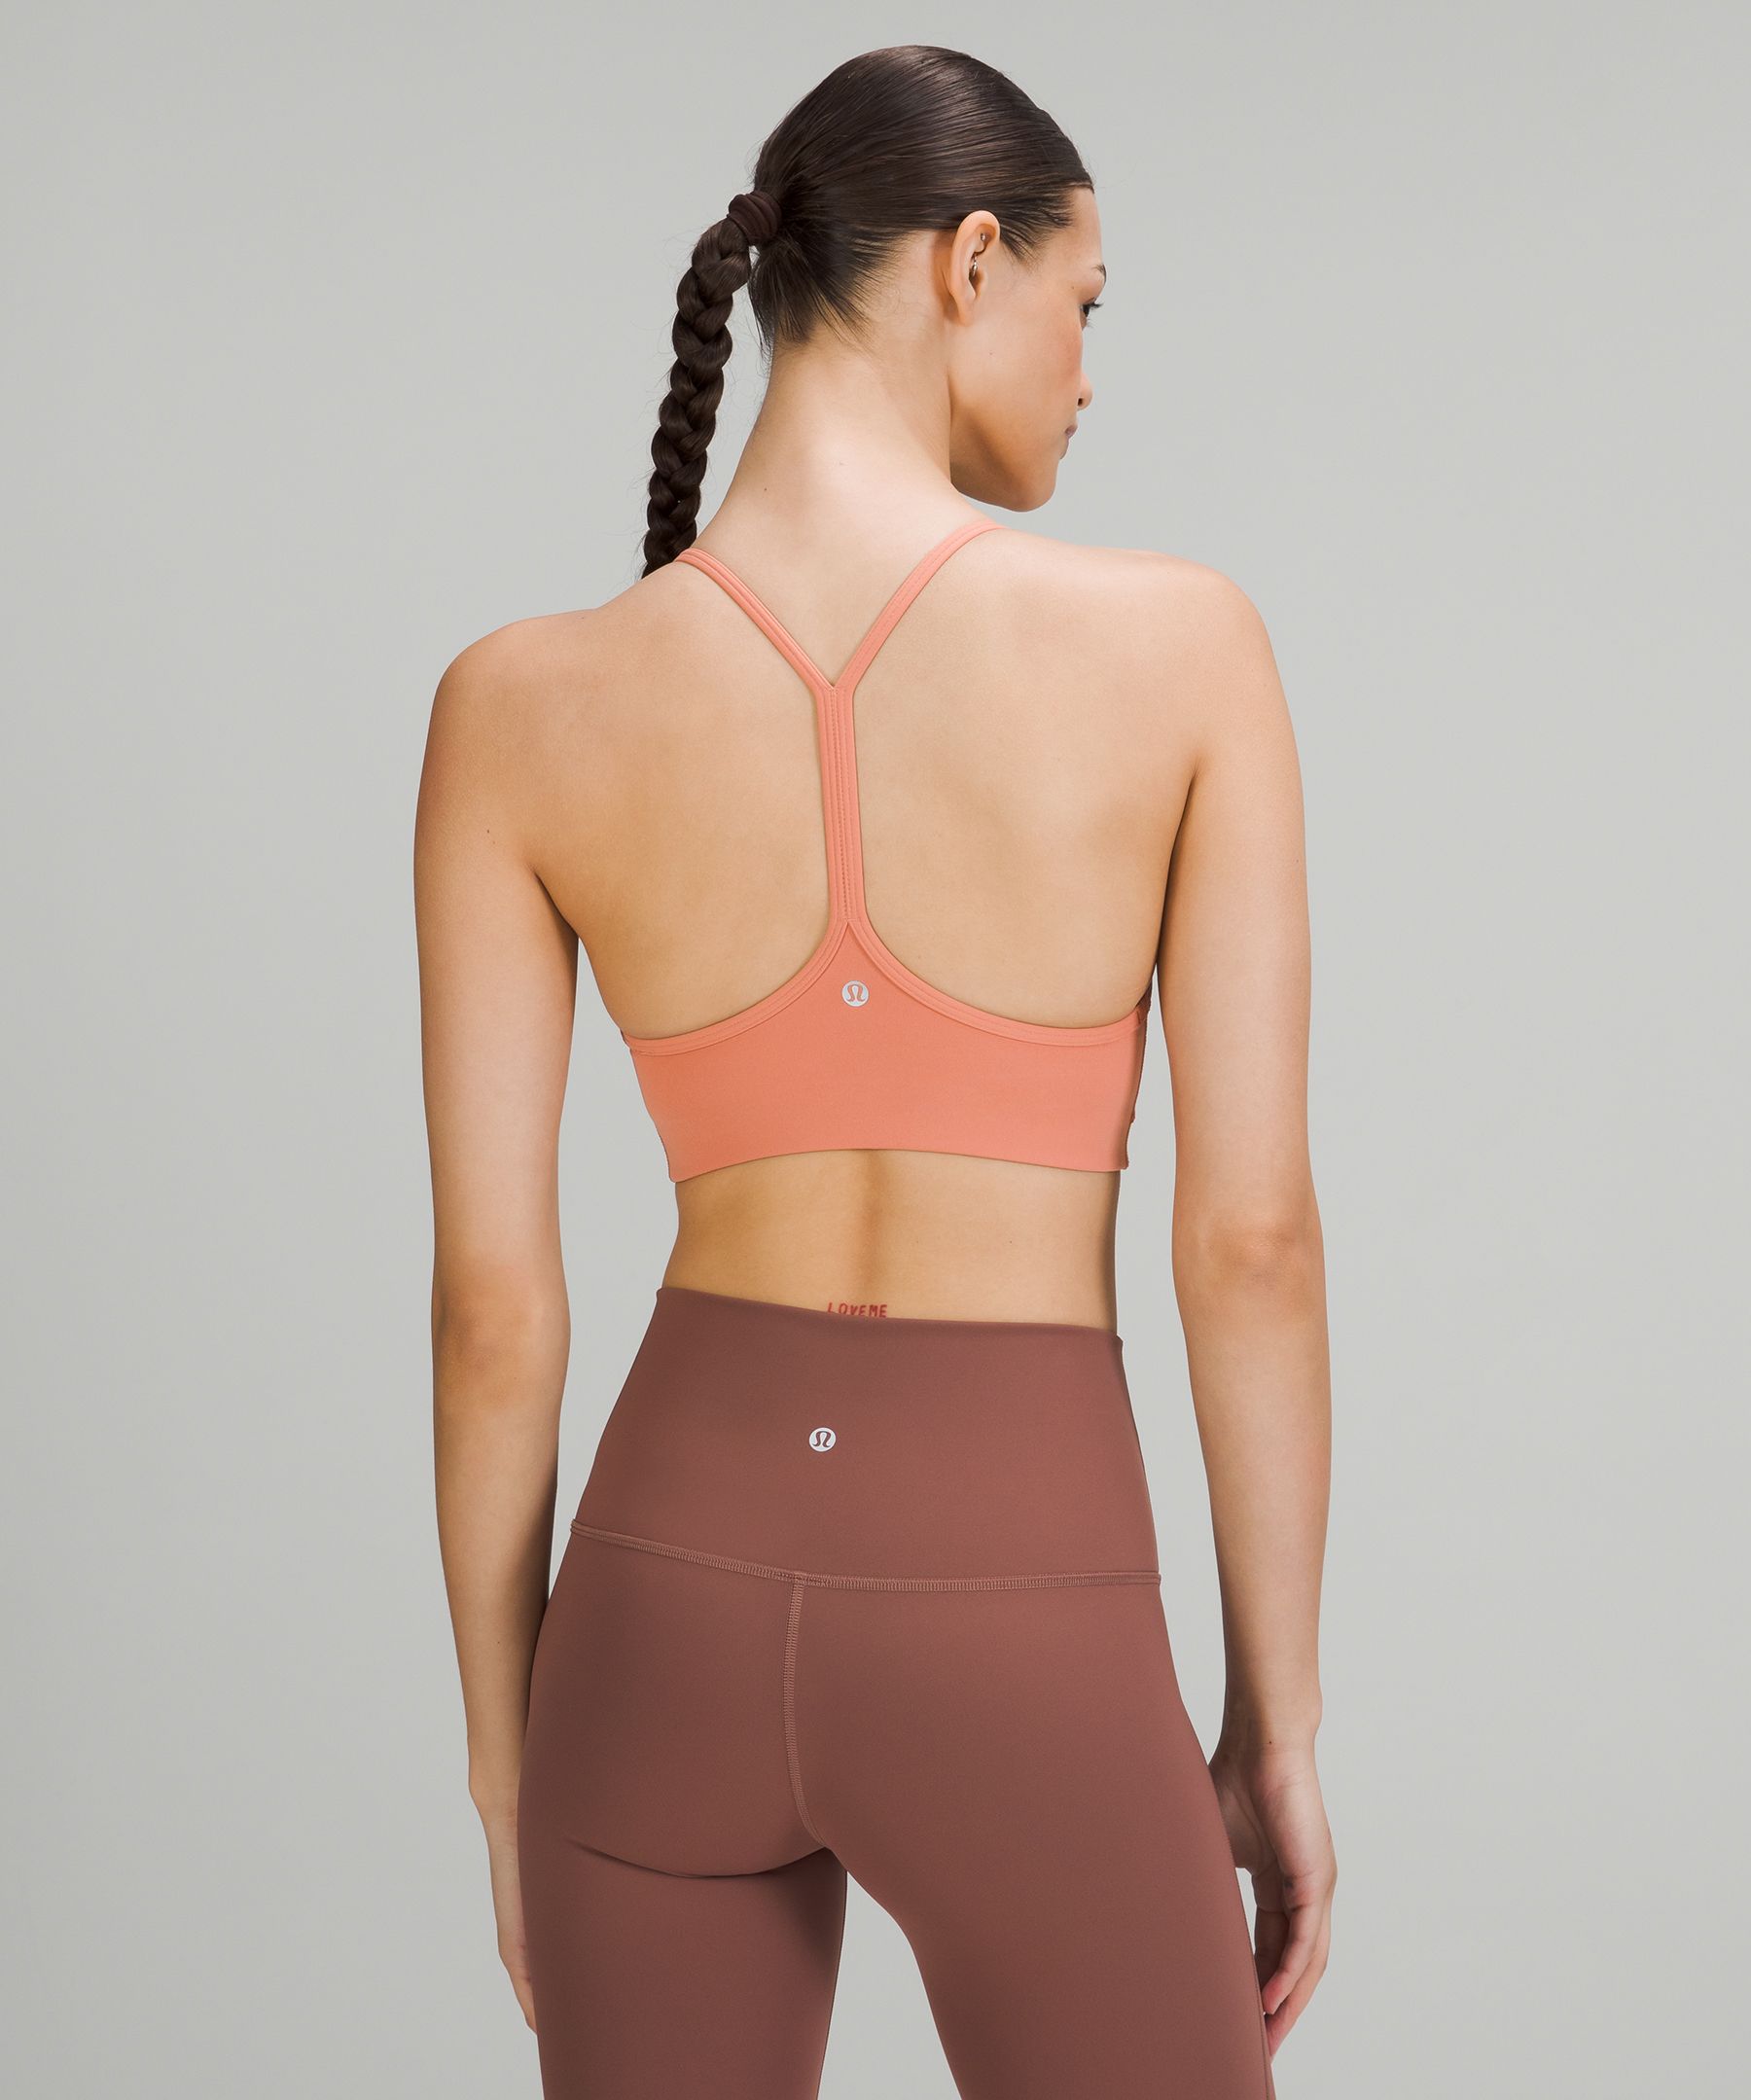 Lululemon Flow Y Bra Size 10 - $60 New With Tags - From Amanda